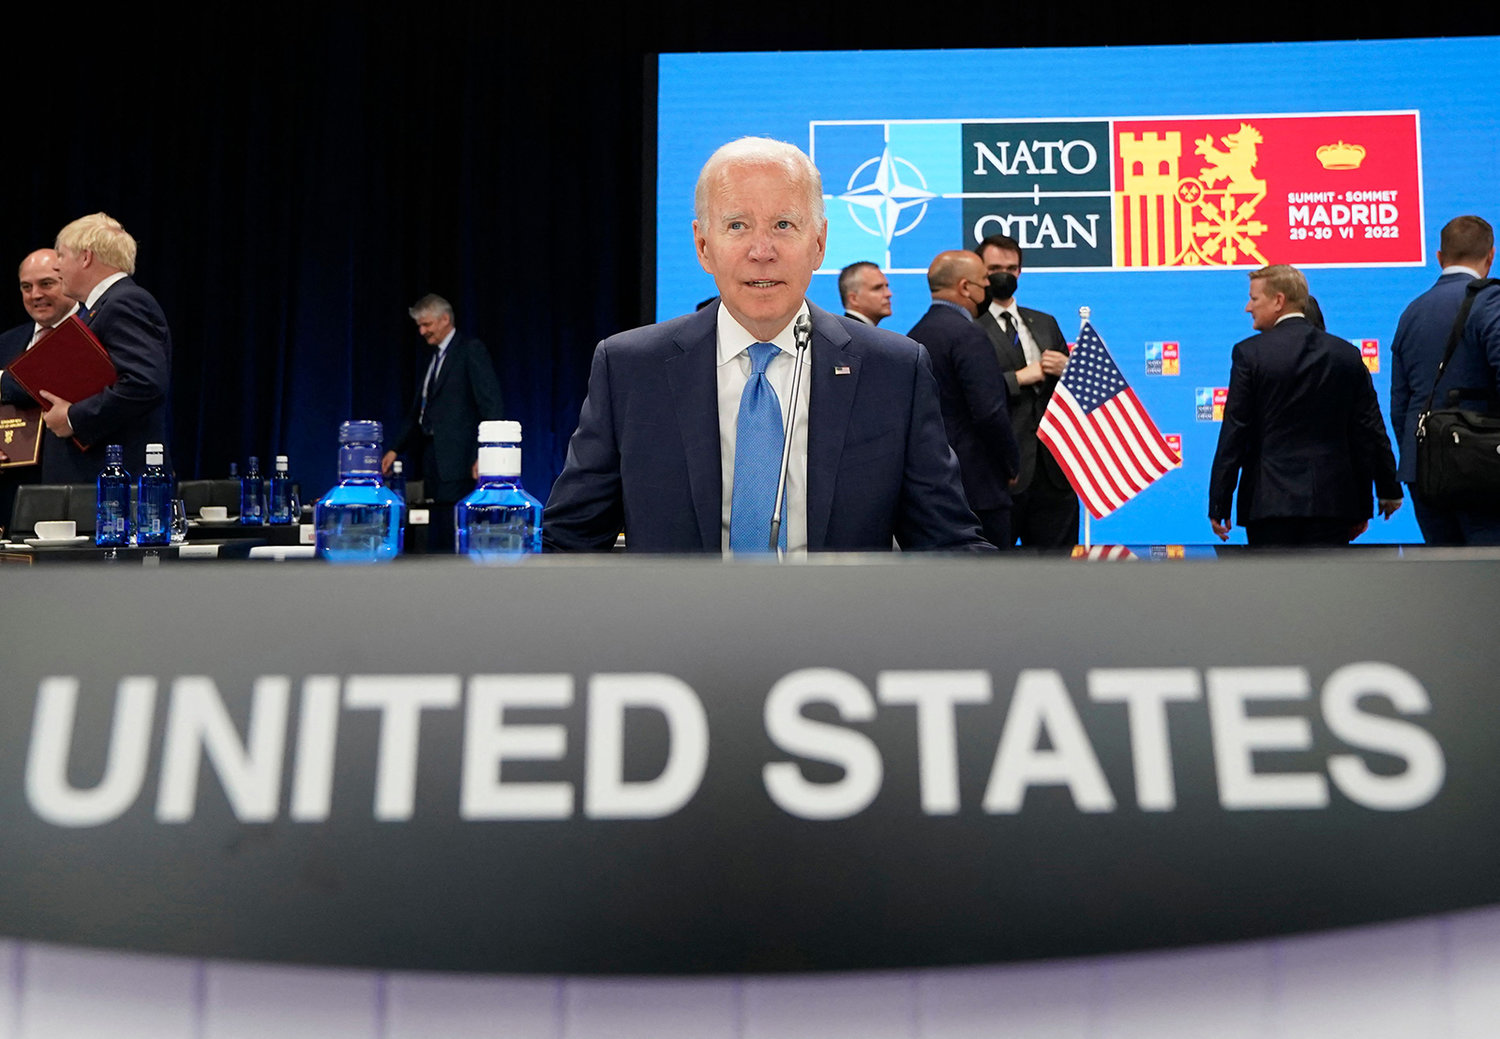 US President Joe Biden waits for the start of a round table meeting at a NATO summit in Madrid, on June 29, 2022. (Susan Walsh/Pool/AFP via Getty Images/TNS)